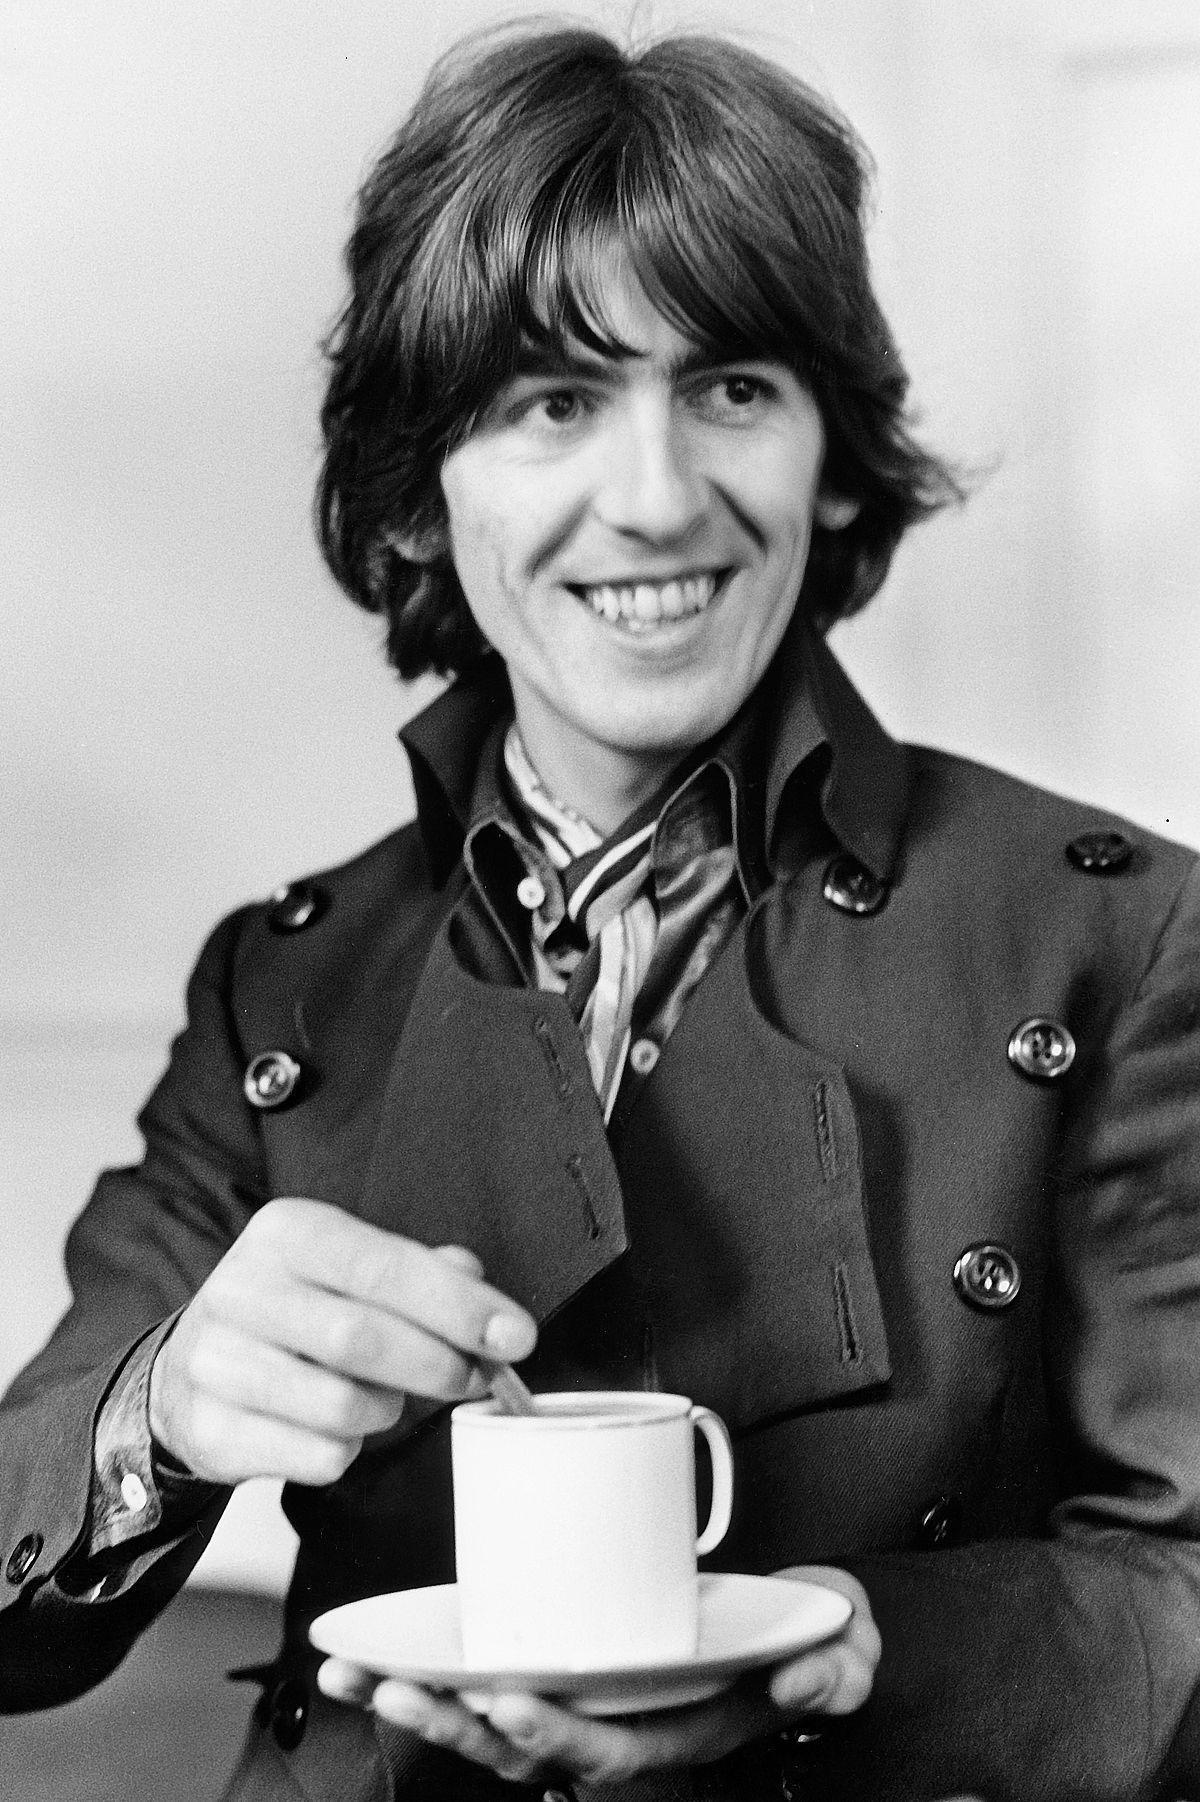 High Quality George Harrison Wallpaper. Full HD Picture